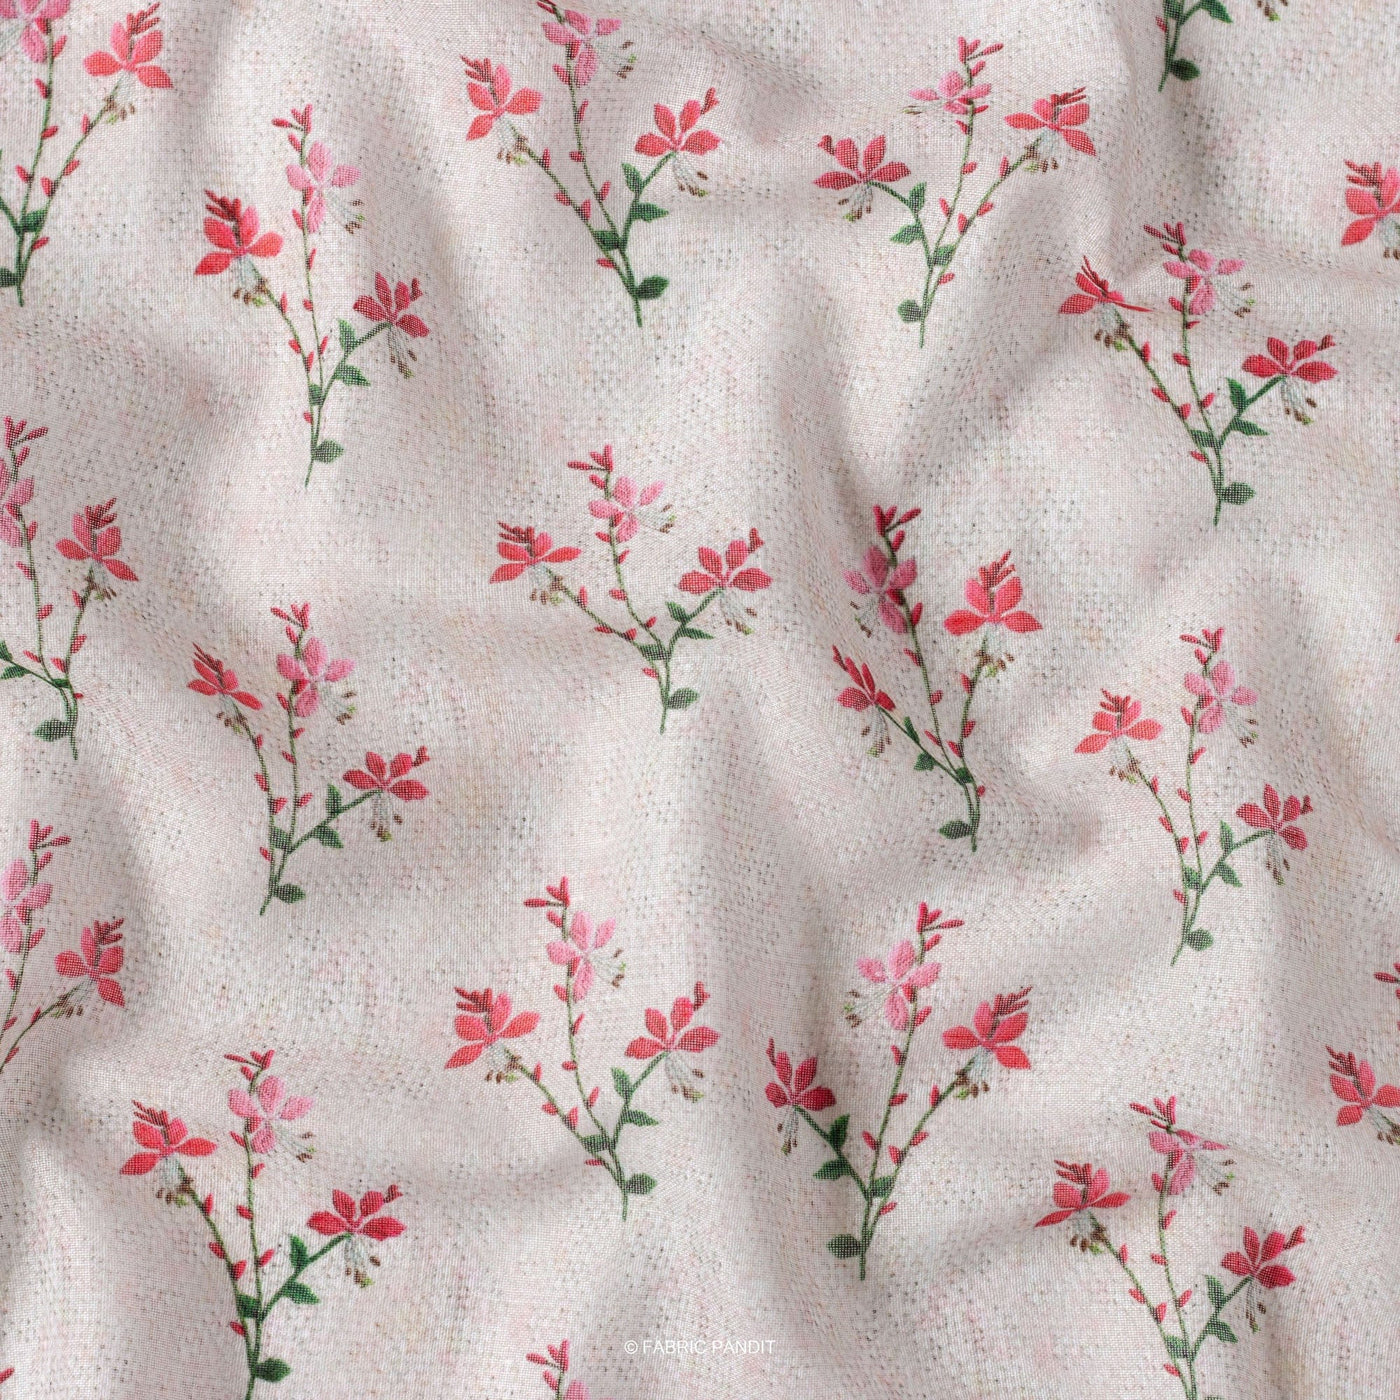 Fabric Pandit Cut Piece (Cut Piece) Grey and Red Tri-Flower Bunch Digital Printed Linen Neps Fabric (Width 44 Inches)